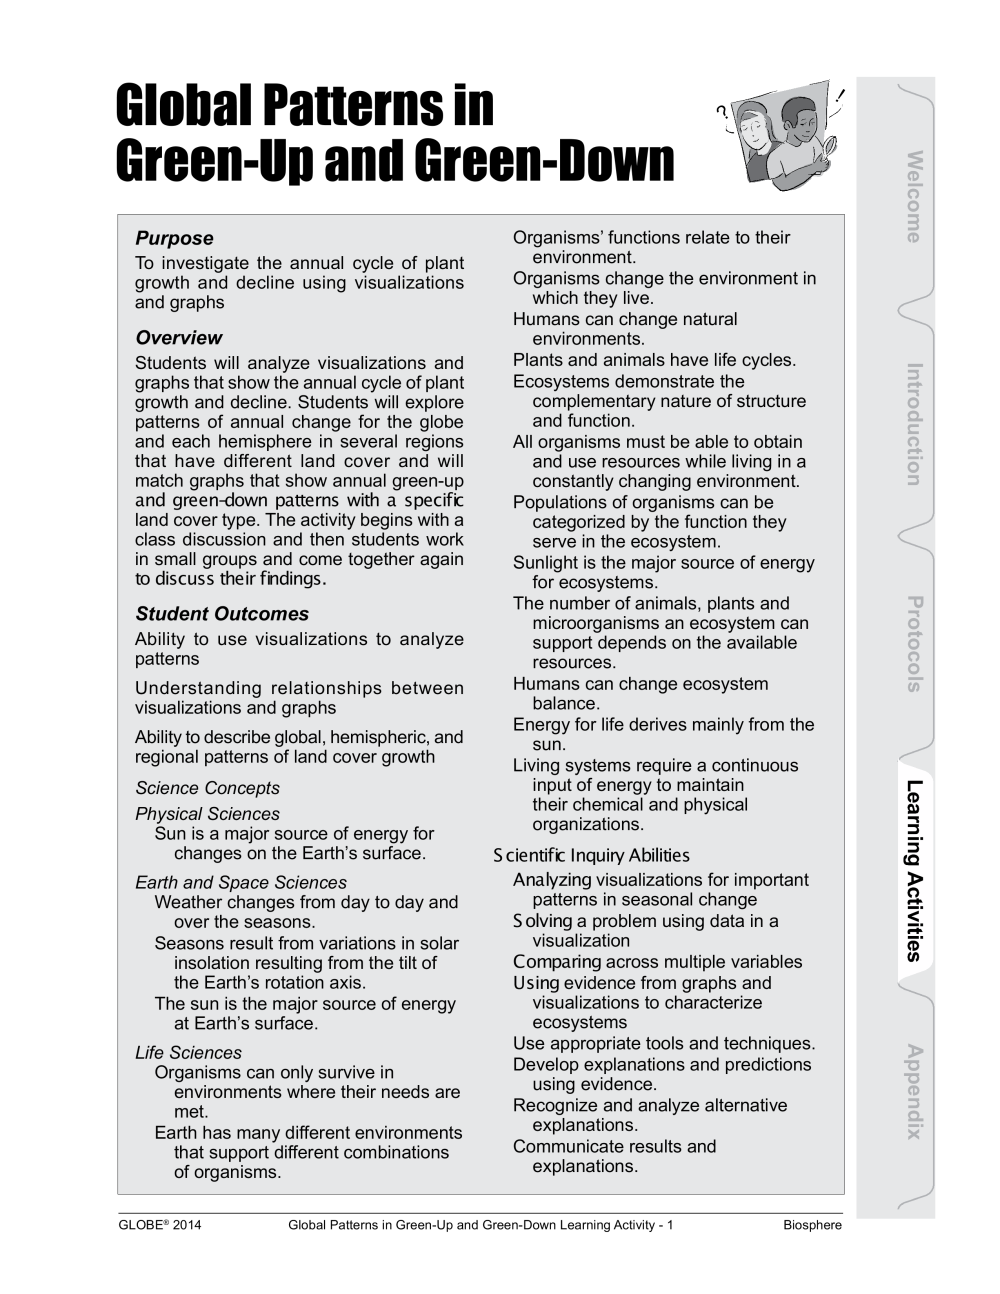 Learning Activities preview for P6 Global Patterns in Green-up and Green-down (pdf)